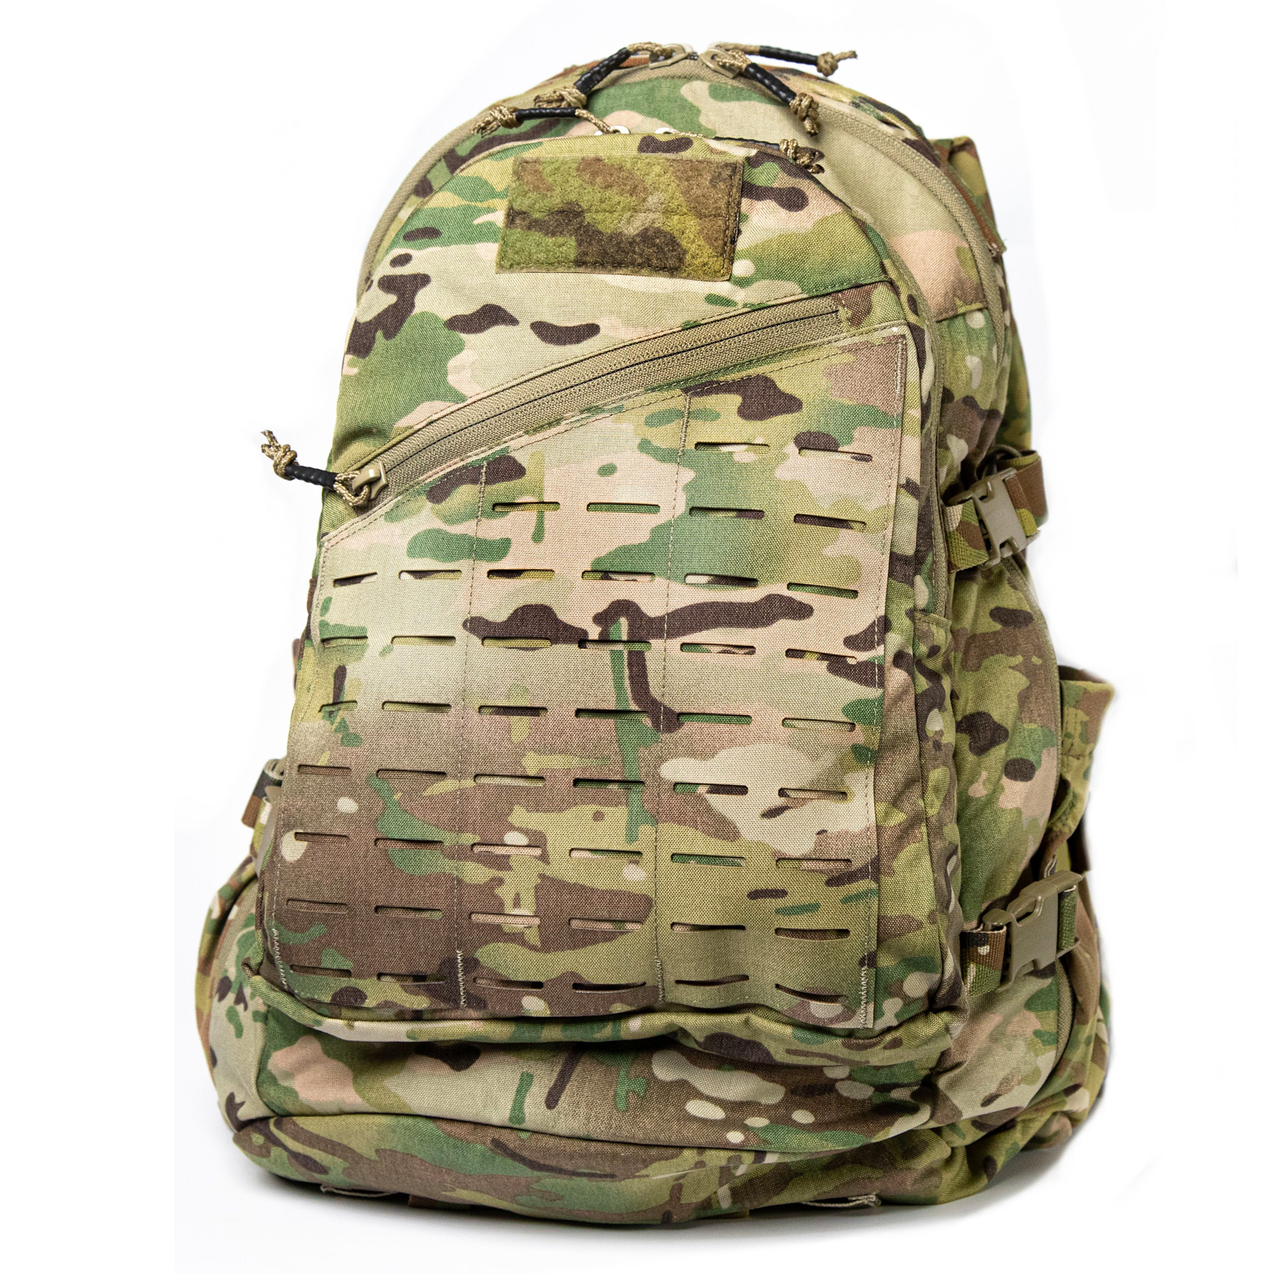 LBTEagle Industries A-III 3DAY ASSAULT PACK